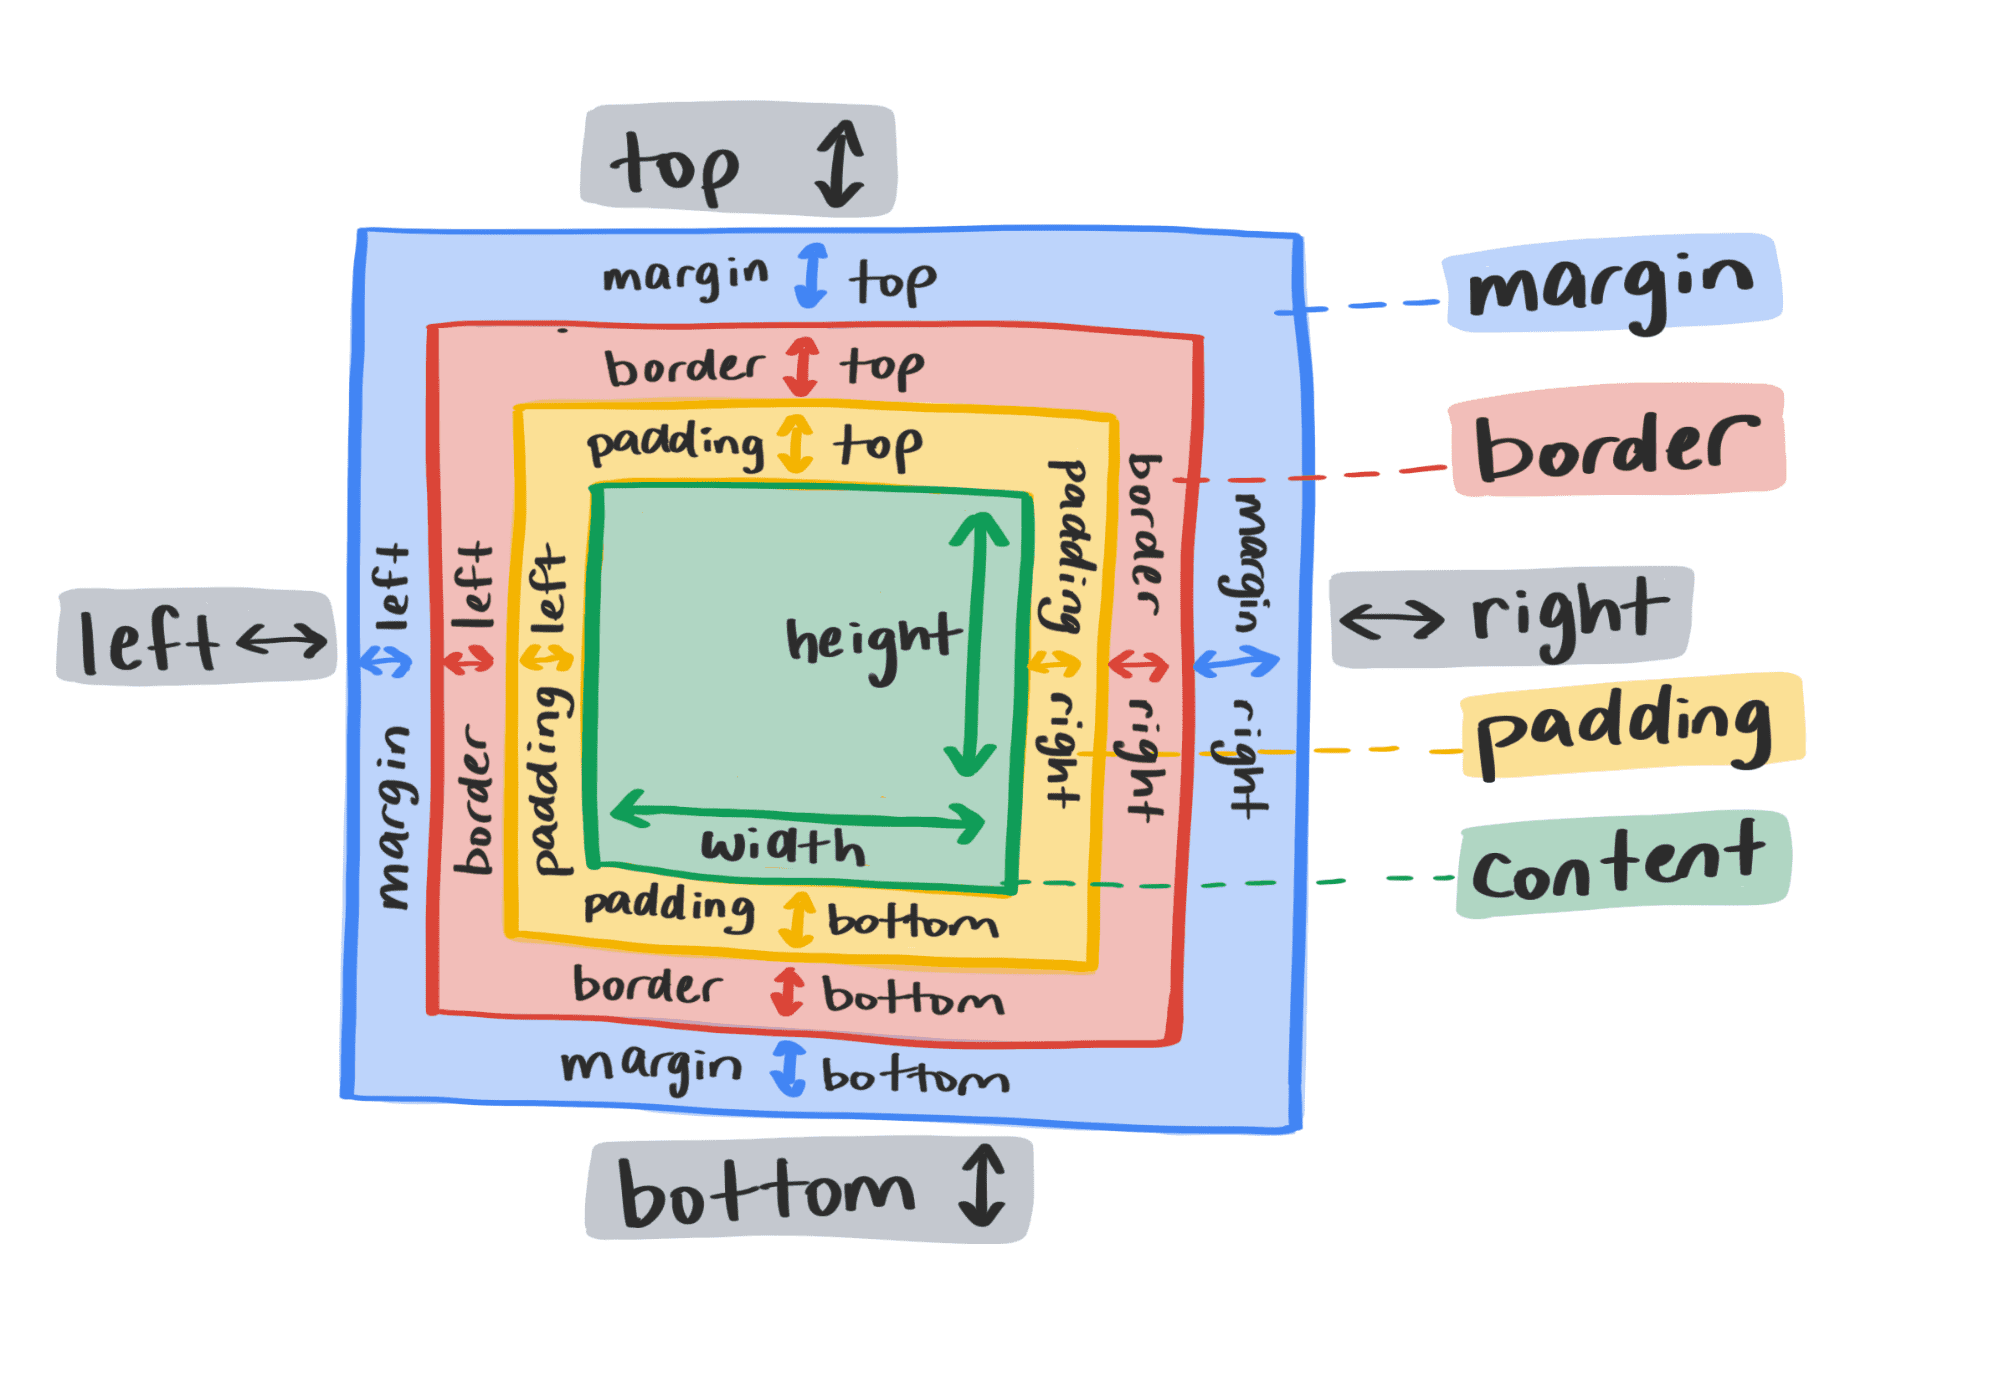 A diagram showing traditional CSS layout properties.